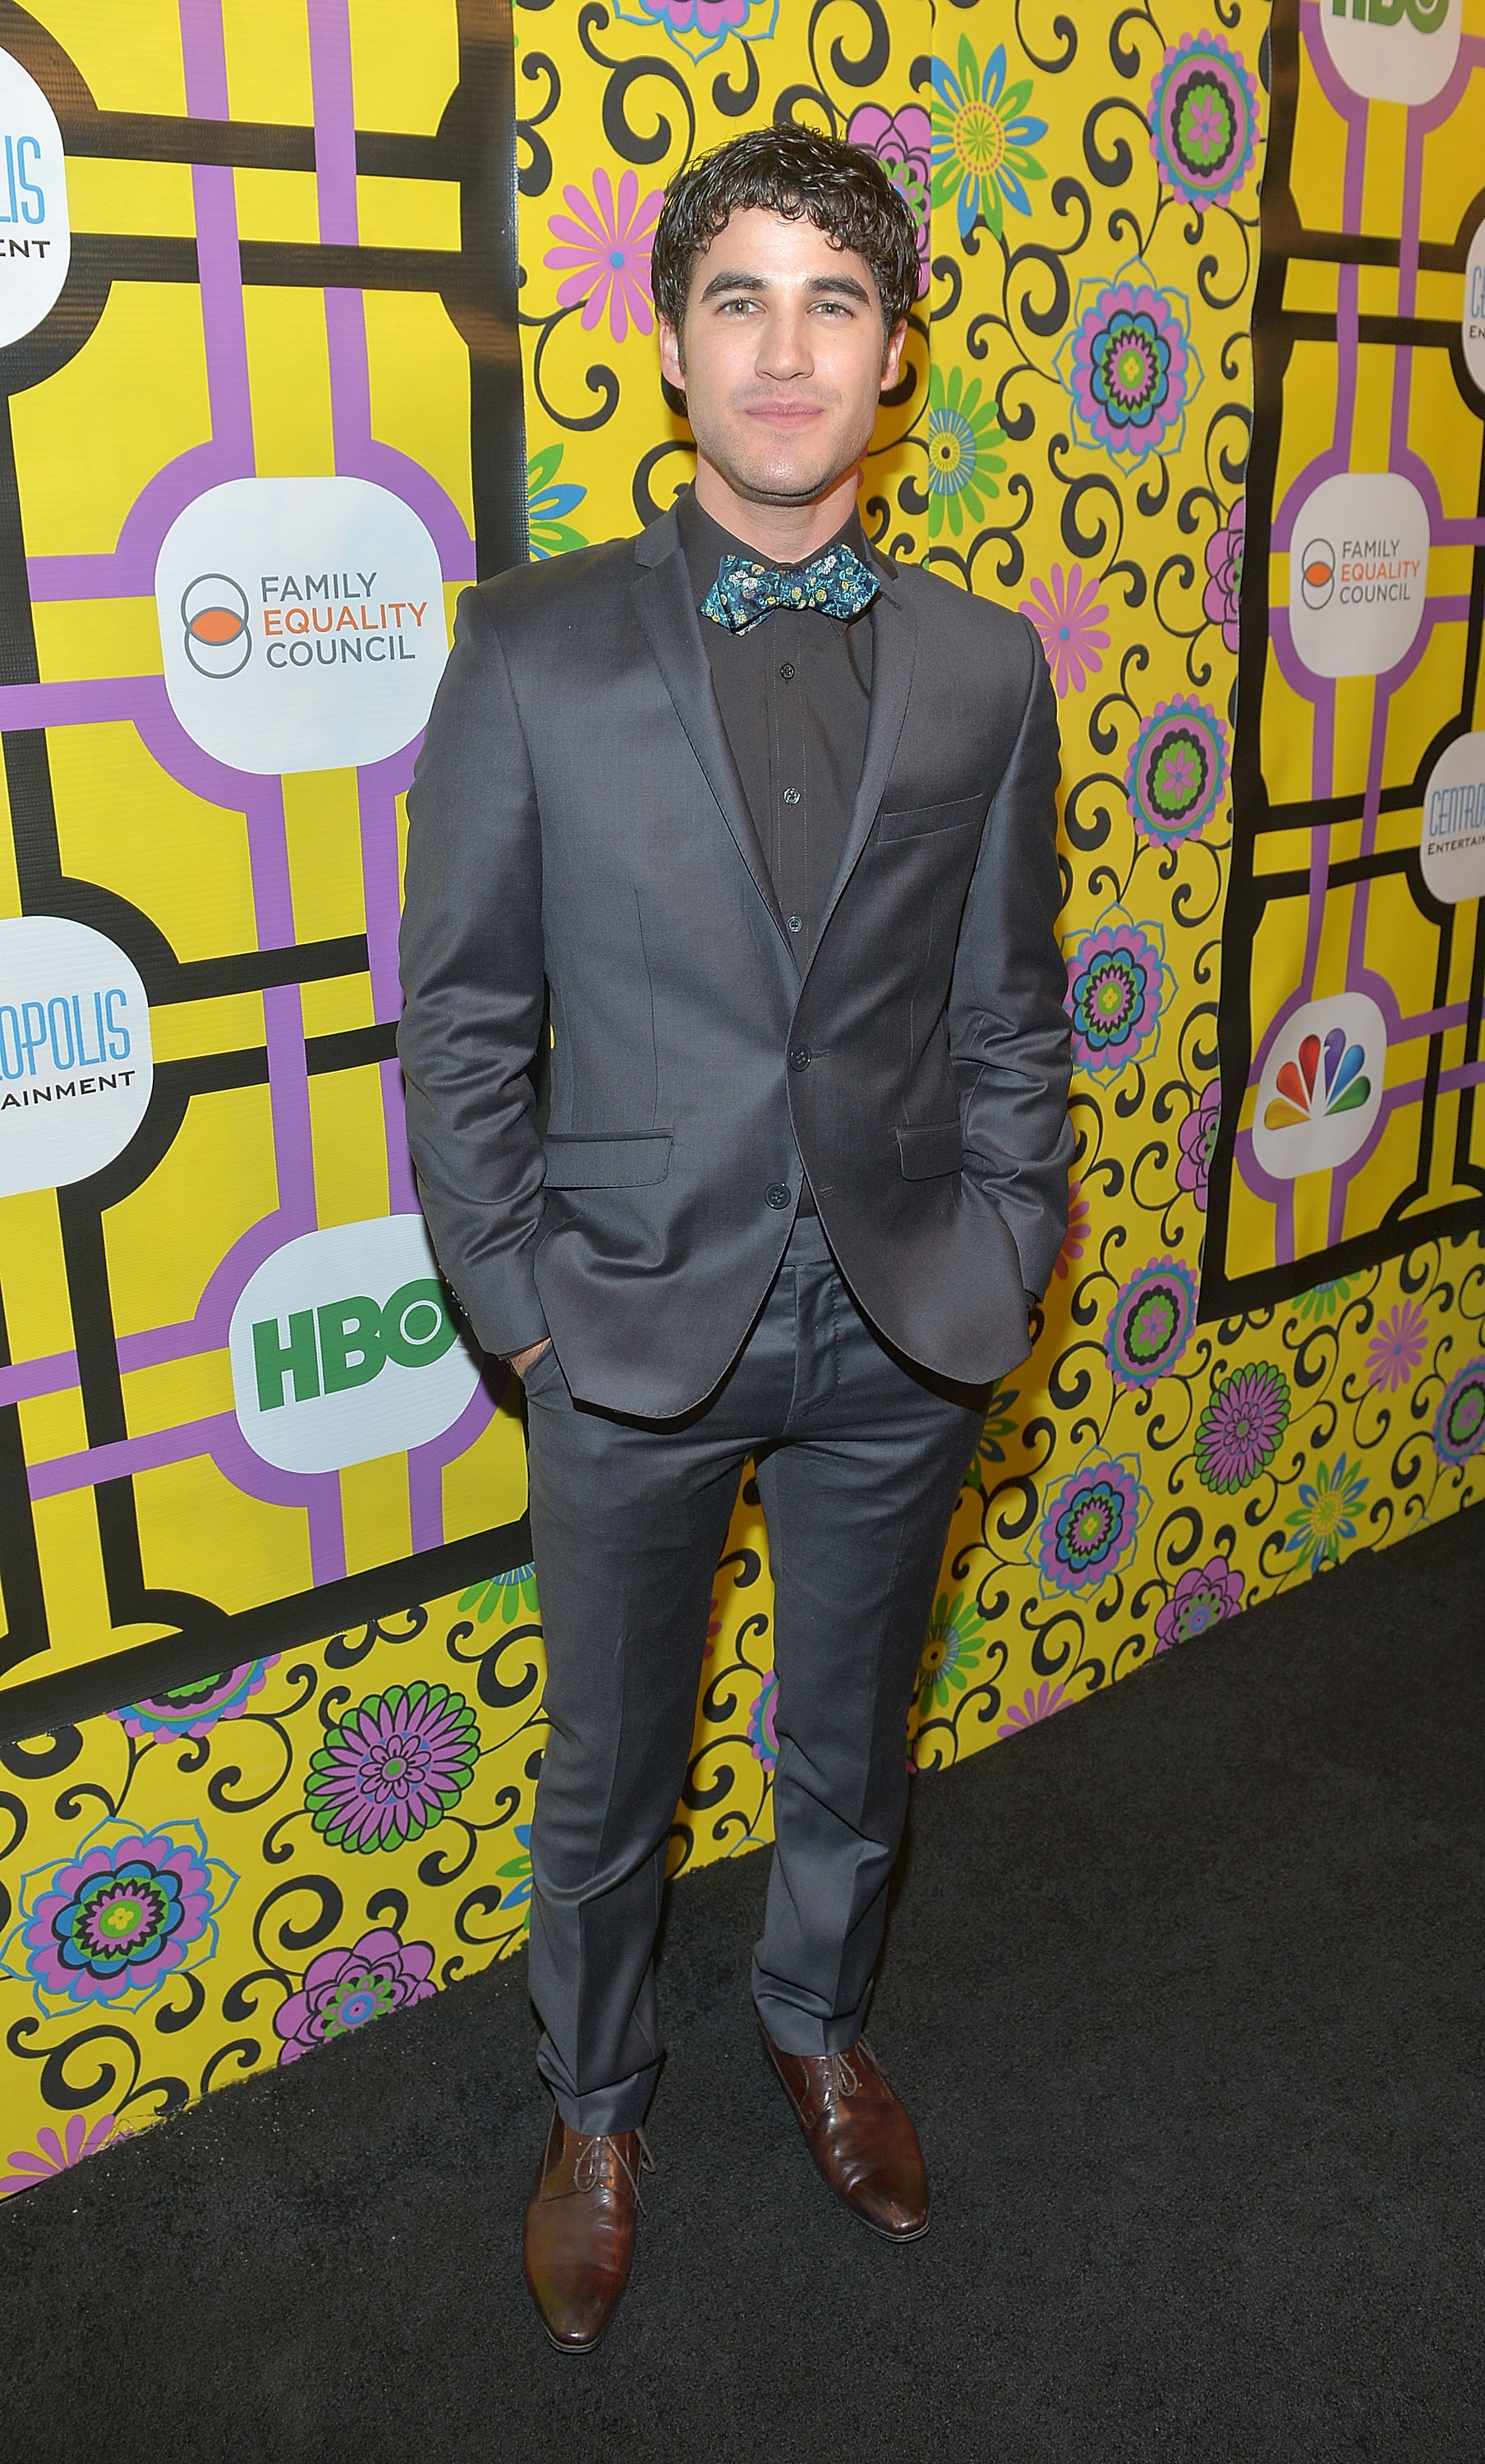 UNIVERSAL CITY, CA - FEBRUARY 09:  Actor Darren Criss attends the Family Equality Council LA Awards Dinner at The Globe Theatre at Universal Studios on February 9, 2013 in Universal City, California.  (Photo by Charley Gallay/WireImage)